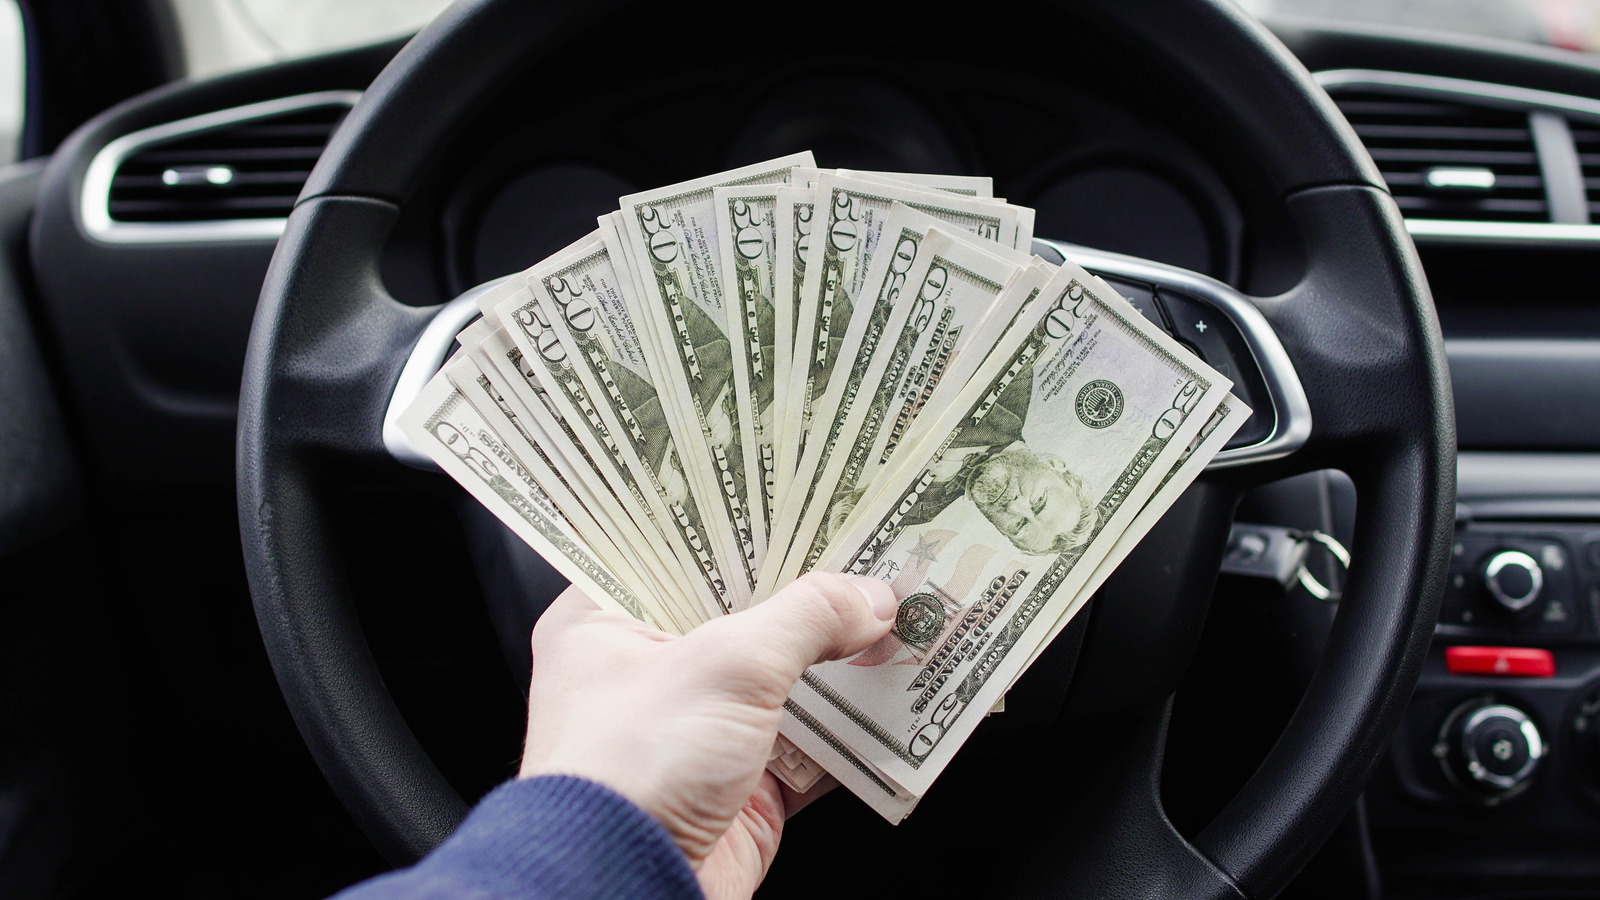 5 Bad Driving Habits That Are Wasting Your Money